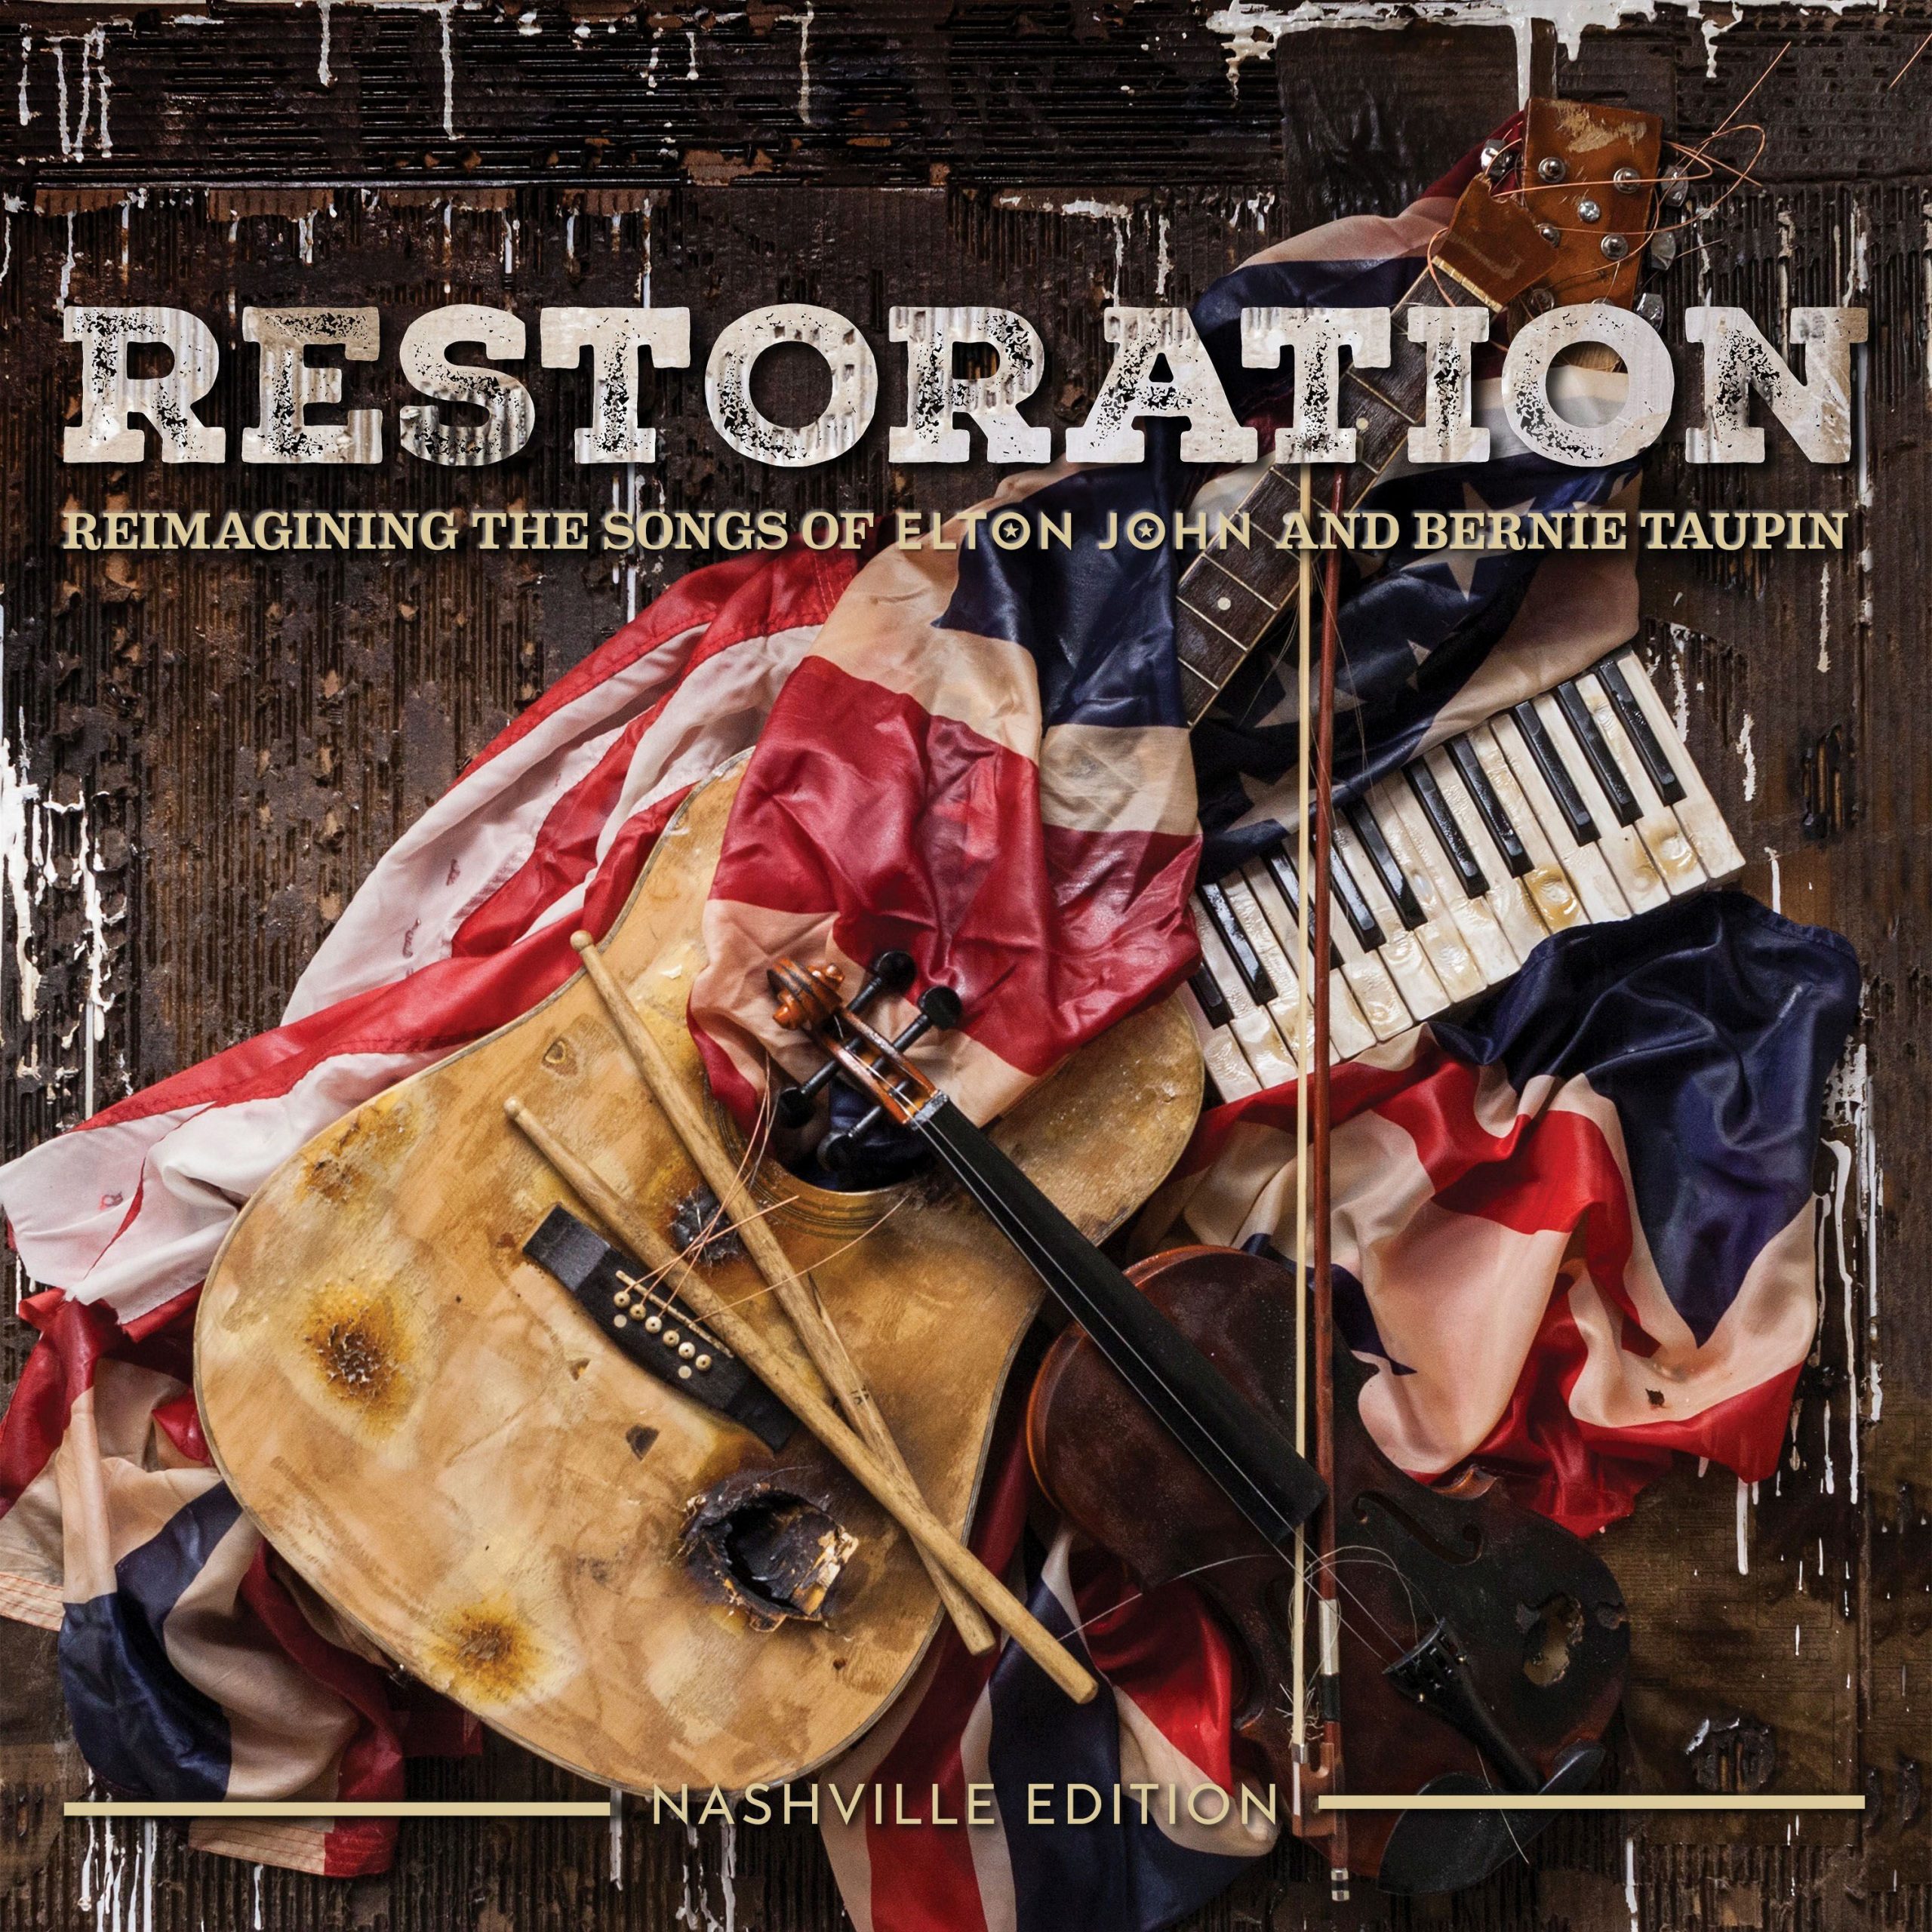 RESTORATION: Reimagining The Songs Of Elton John And Bernie Taupin TO BE RELEASED APRIL 6